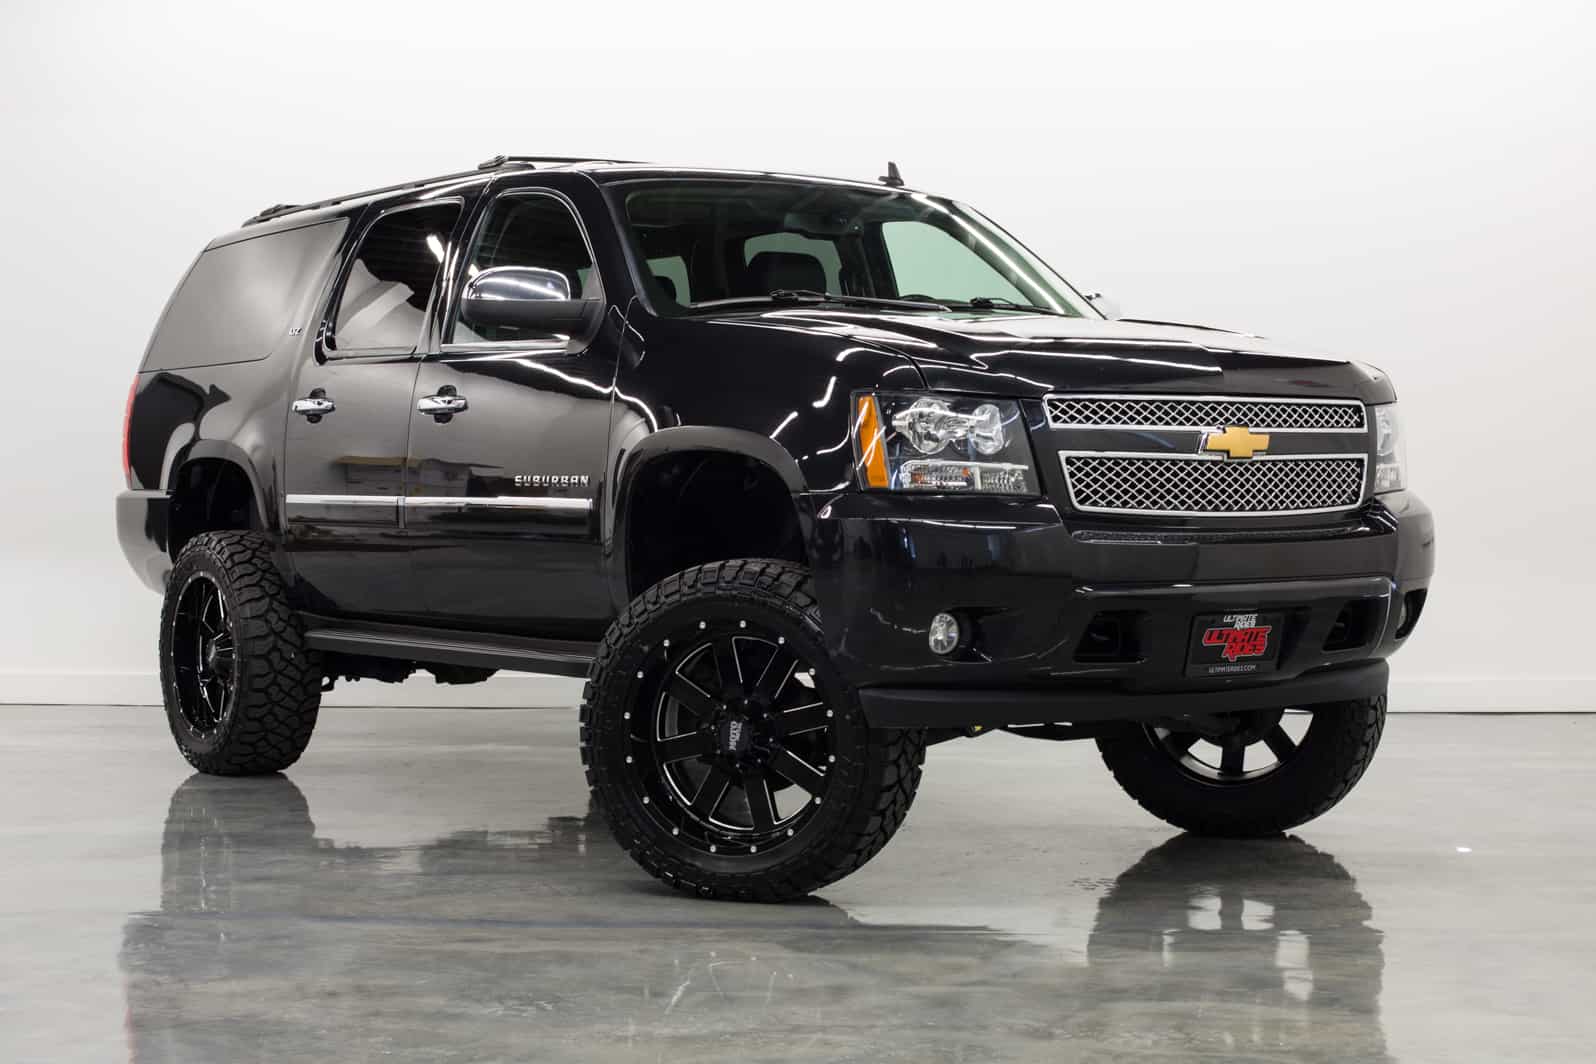 2010 Chevy Suburban Lifted